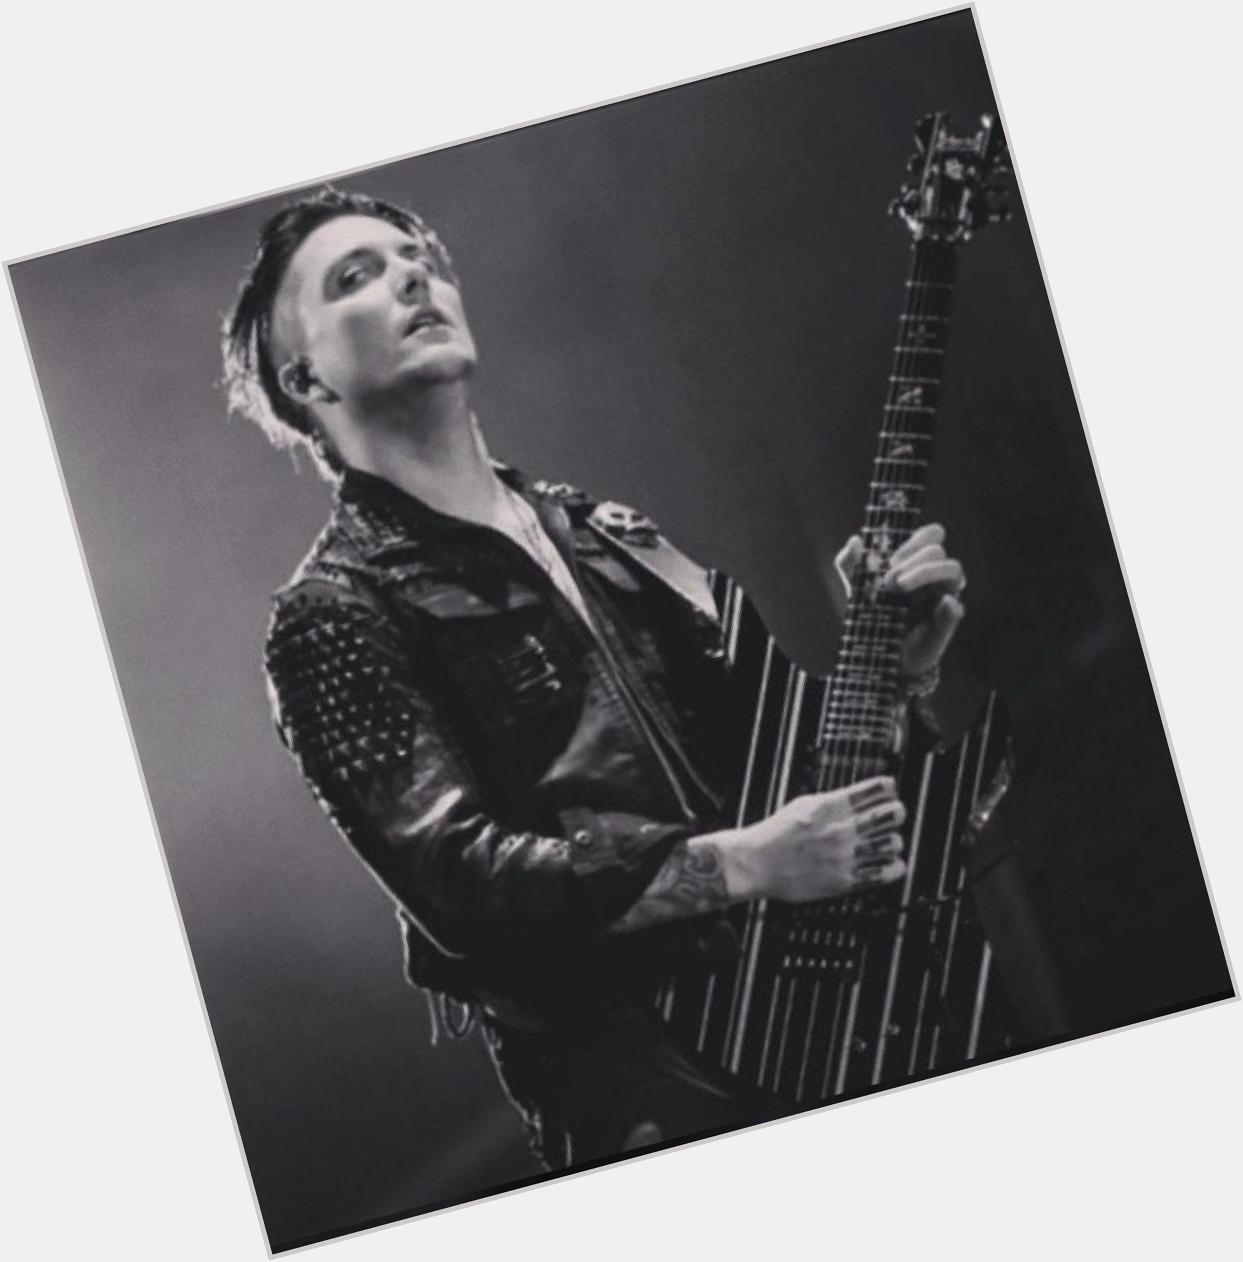 Happy Birthday Brian! Aka Synyster Gates, aka one of the most incredible guitarist and person ever 